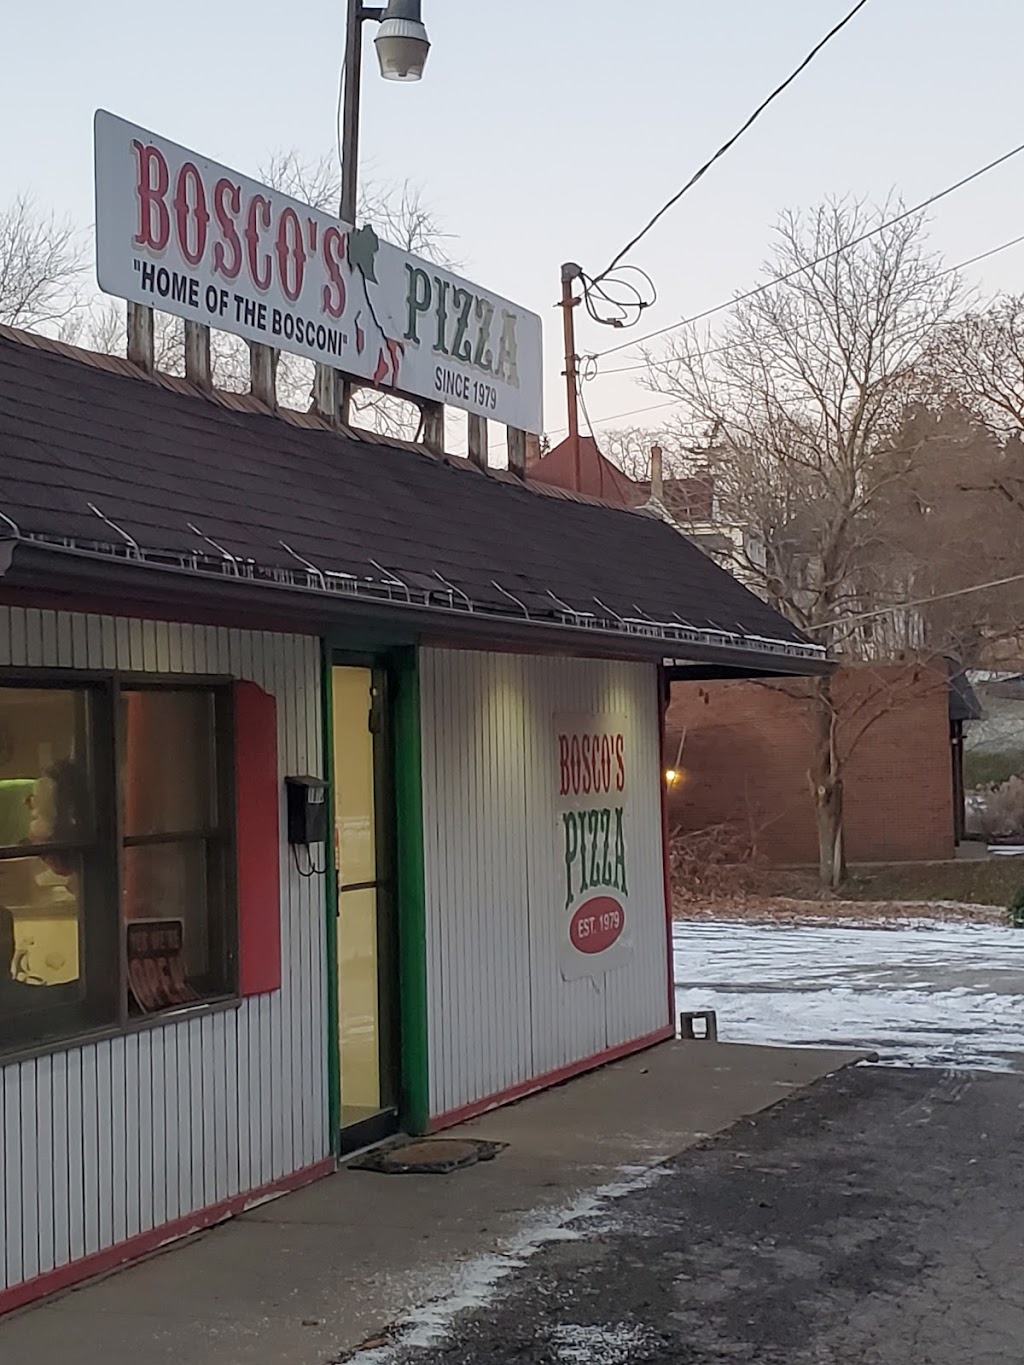 Boscos Pizza | 1835 St Clair Ave, East Liverpool, OH 43920, USA | Phone: (330) 385-4976